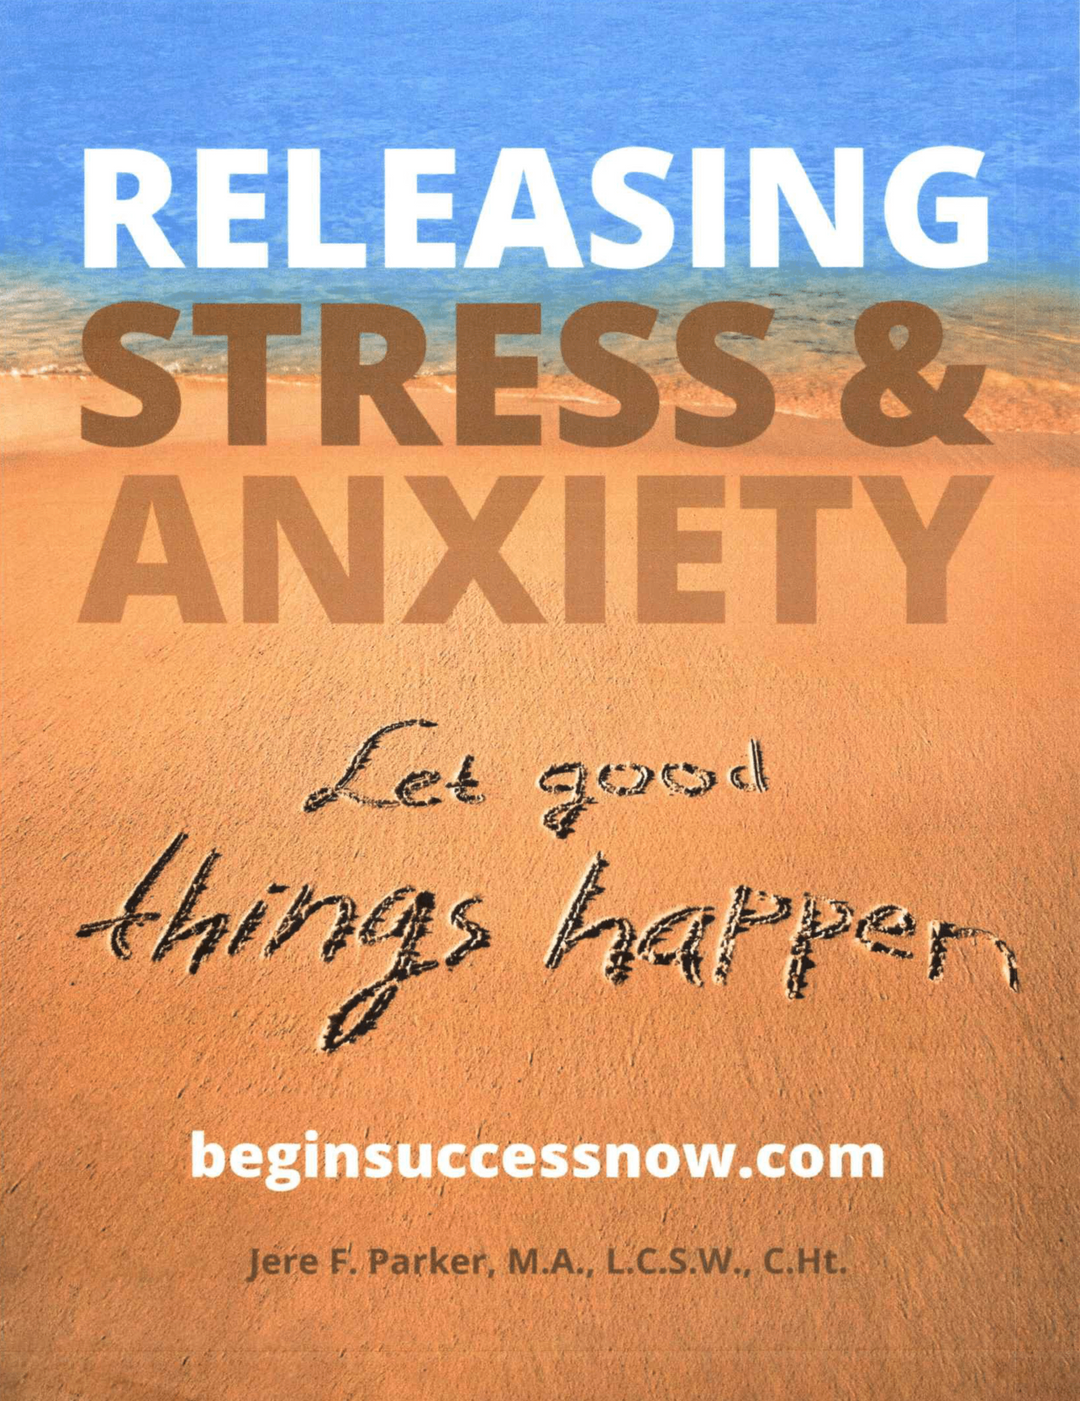 Releasing Stress & Anxiety